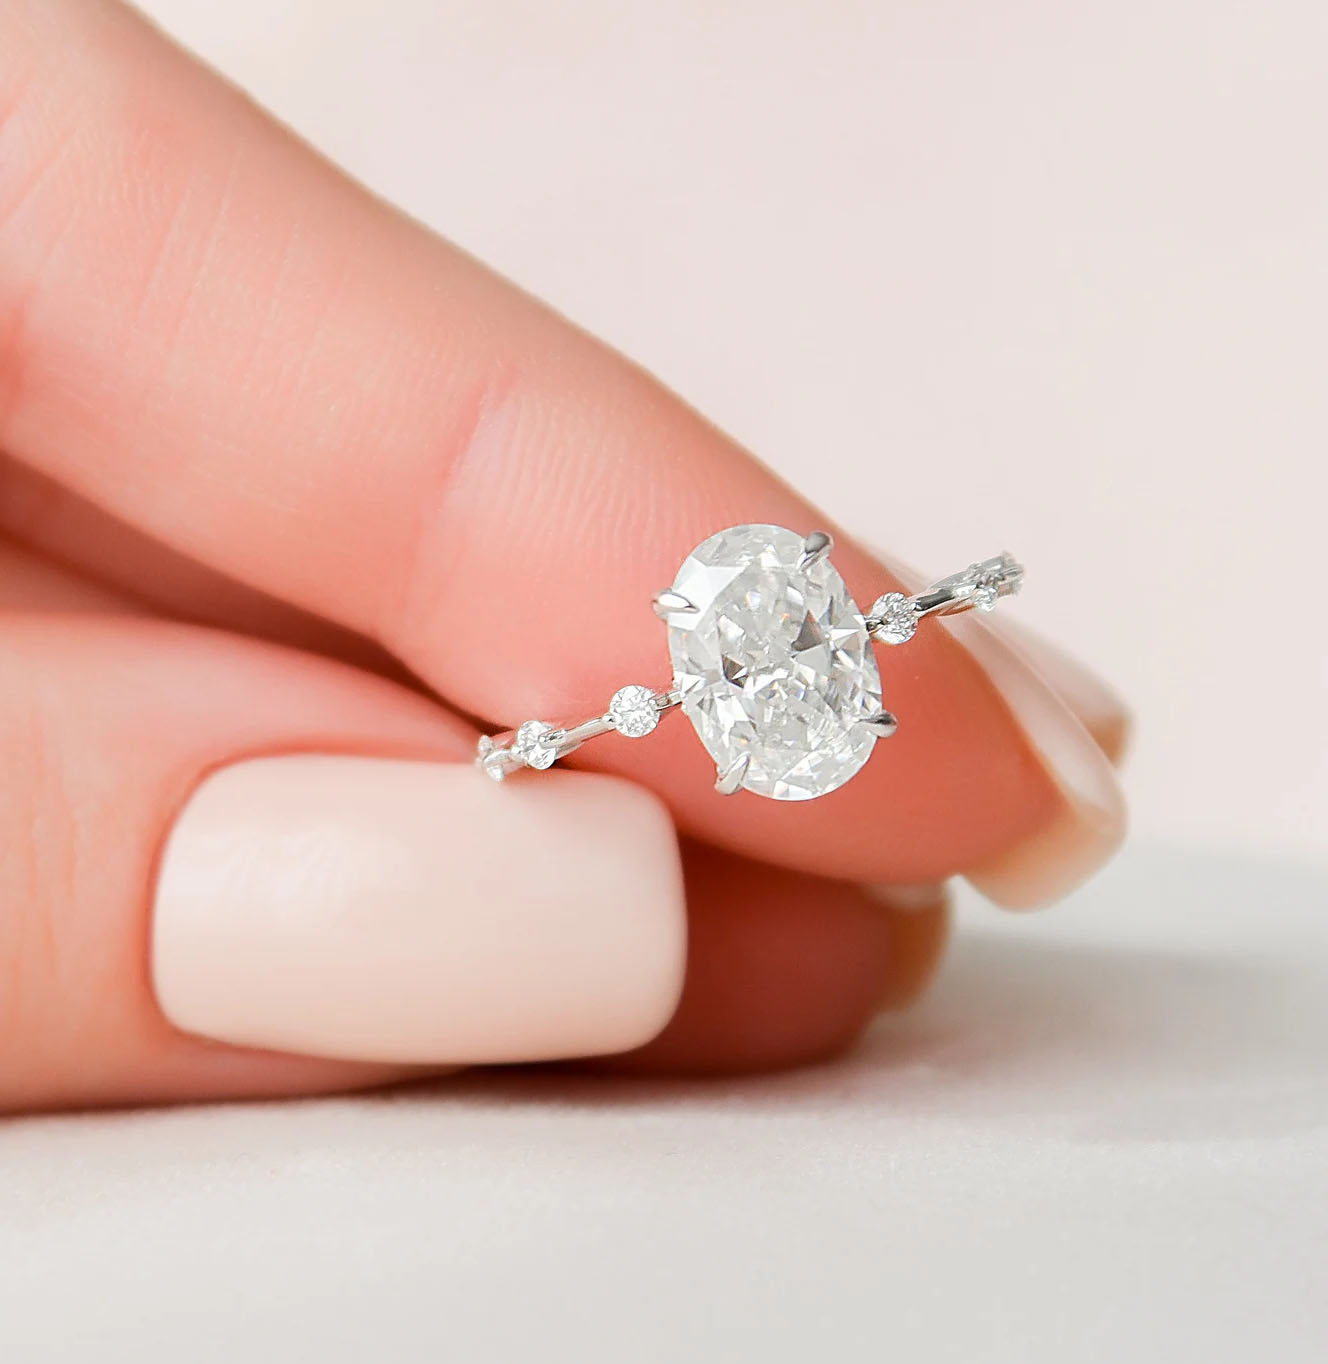 The Most-Searched Engagement Ring Styles